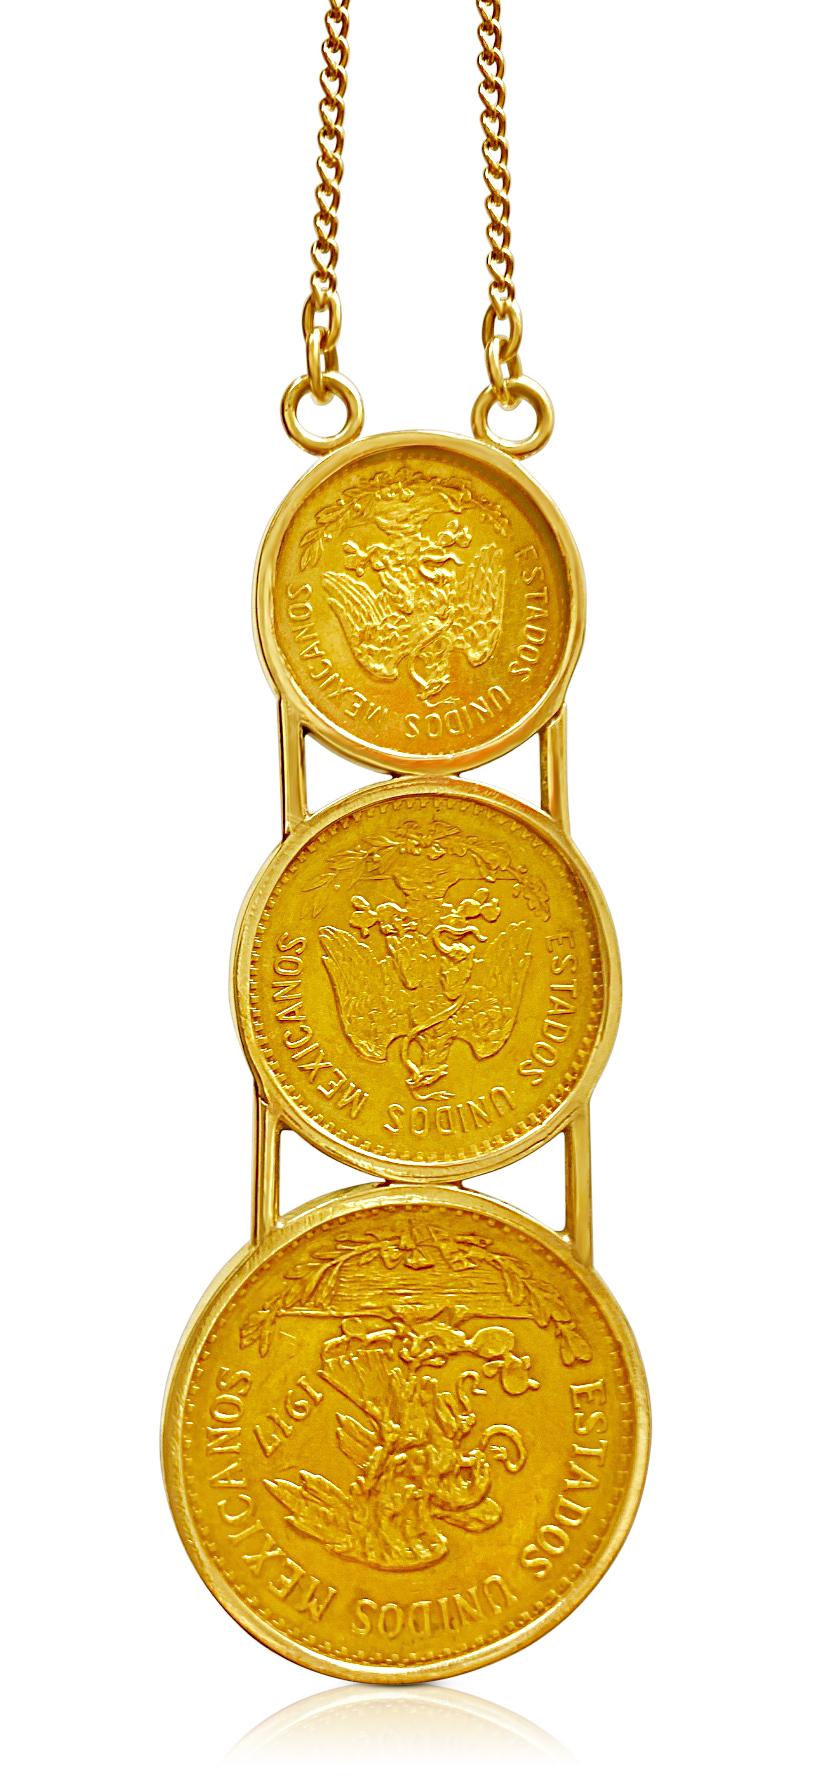 This magnificent Gold Pendant is a treasure of Mexican history and culture: Centering three 22K Pure Gold Mexican Peso Coins and set in 14K Yellow Gold.
Coins:
1) 1906 